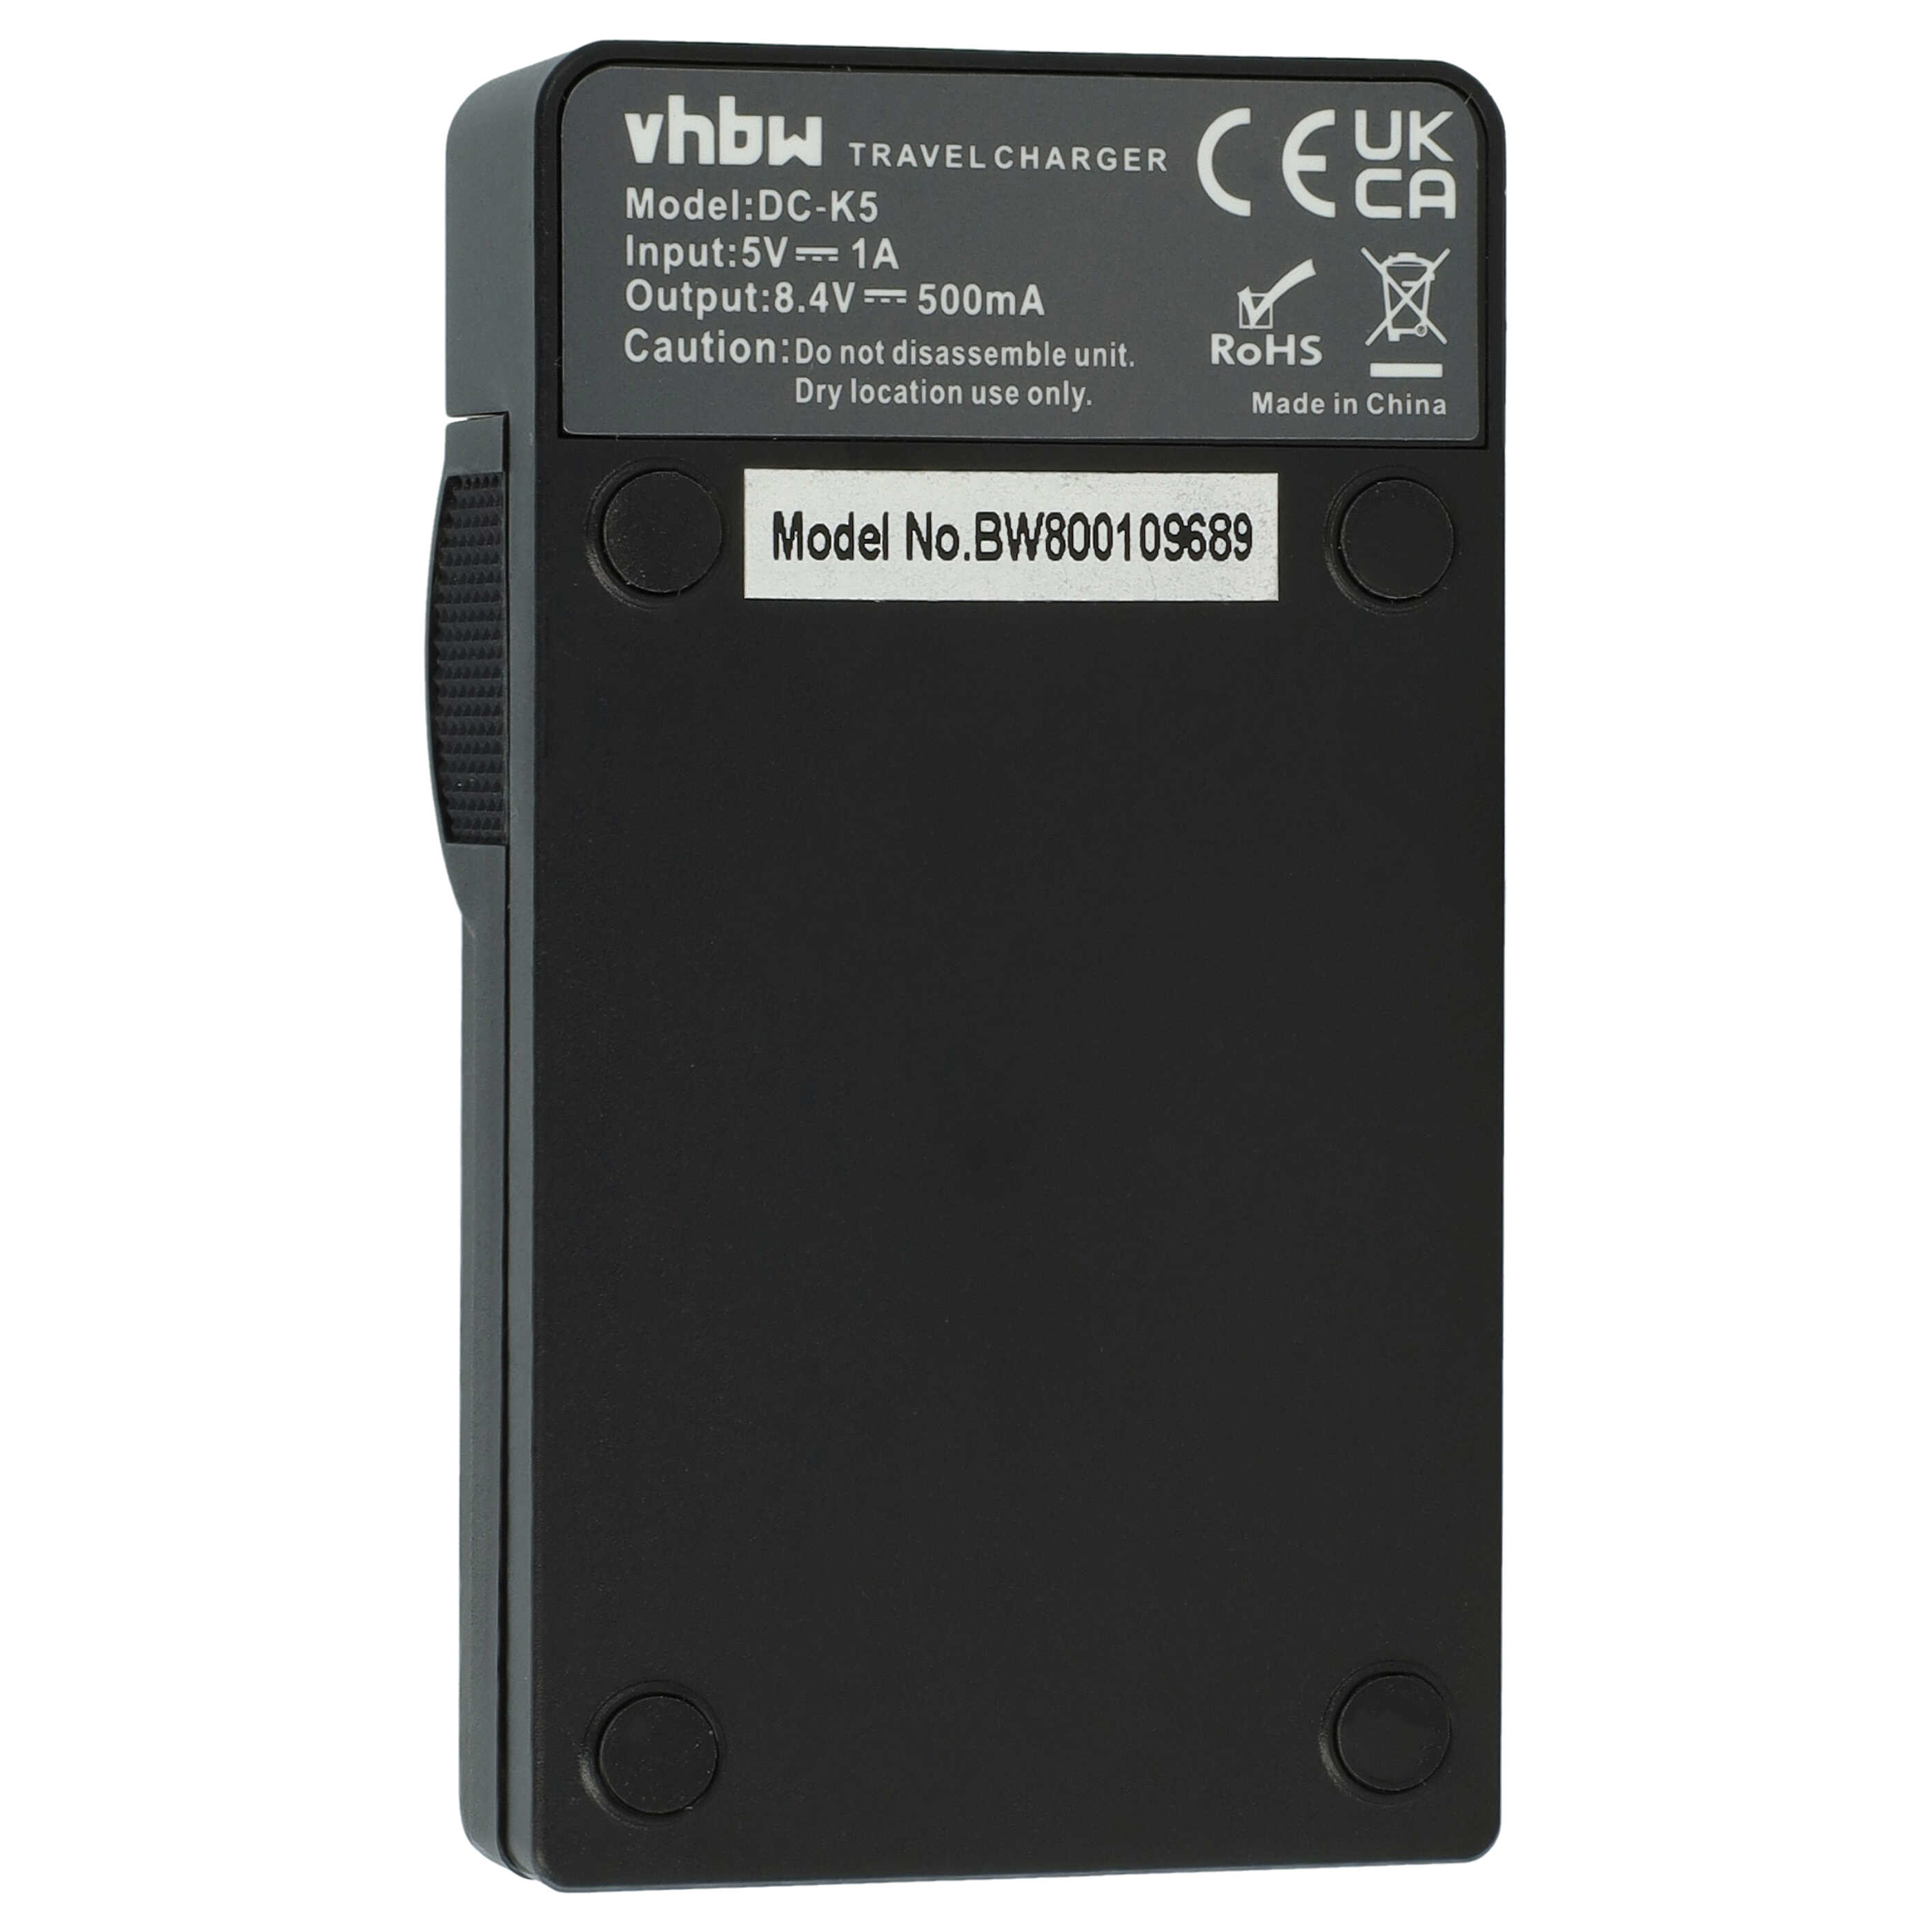 Battery Charger suitable for K-70 Camera etc. - 0.5 A, 8.4 V